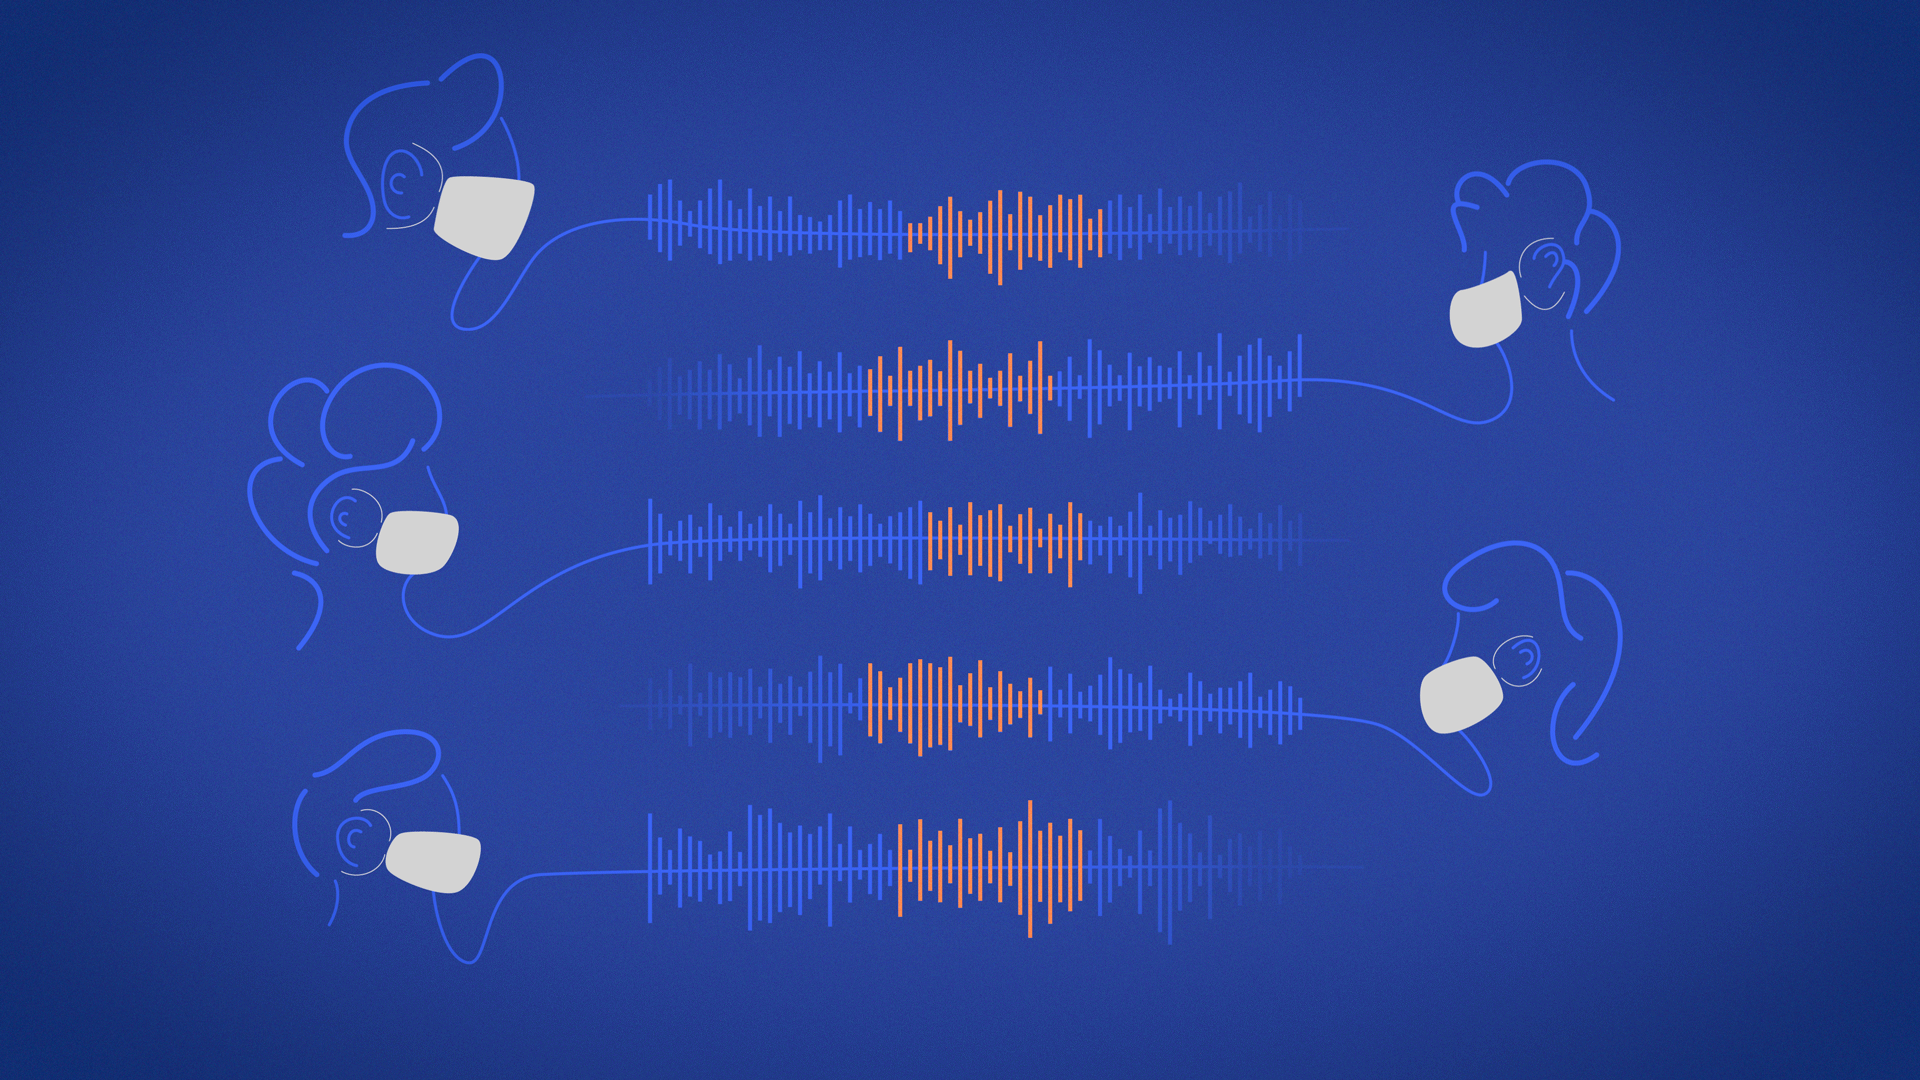 5 blue illustrated heads wearing white masks, each with a "speech wave" coming from their mouths, with the middle part of the wave highlighted orange.